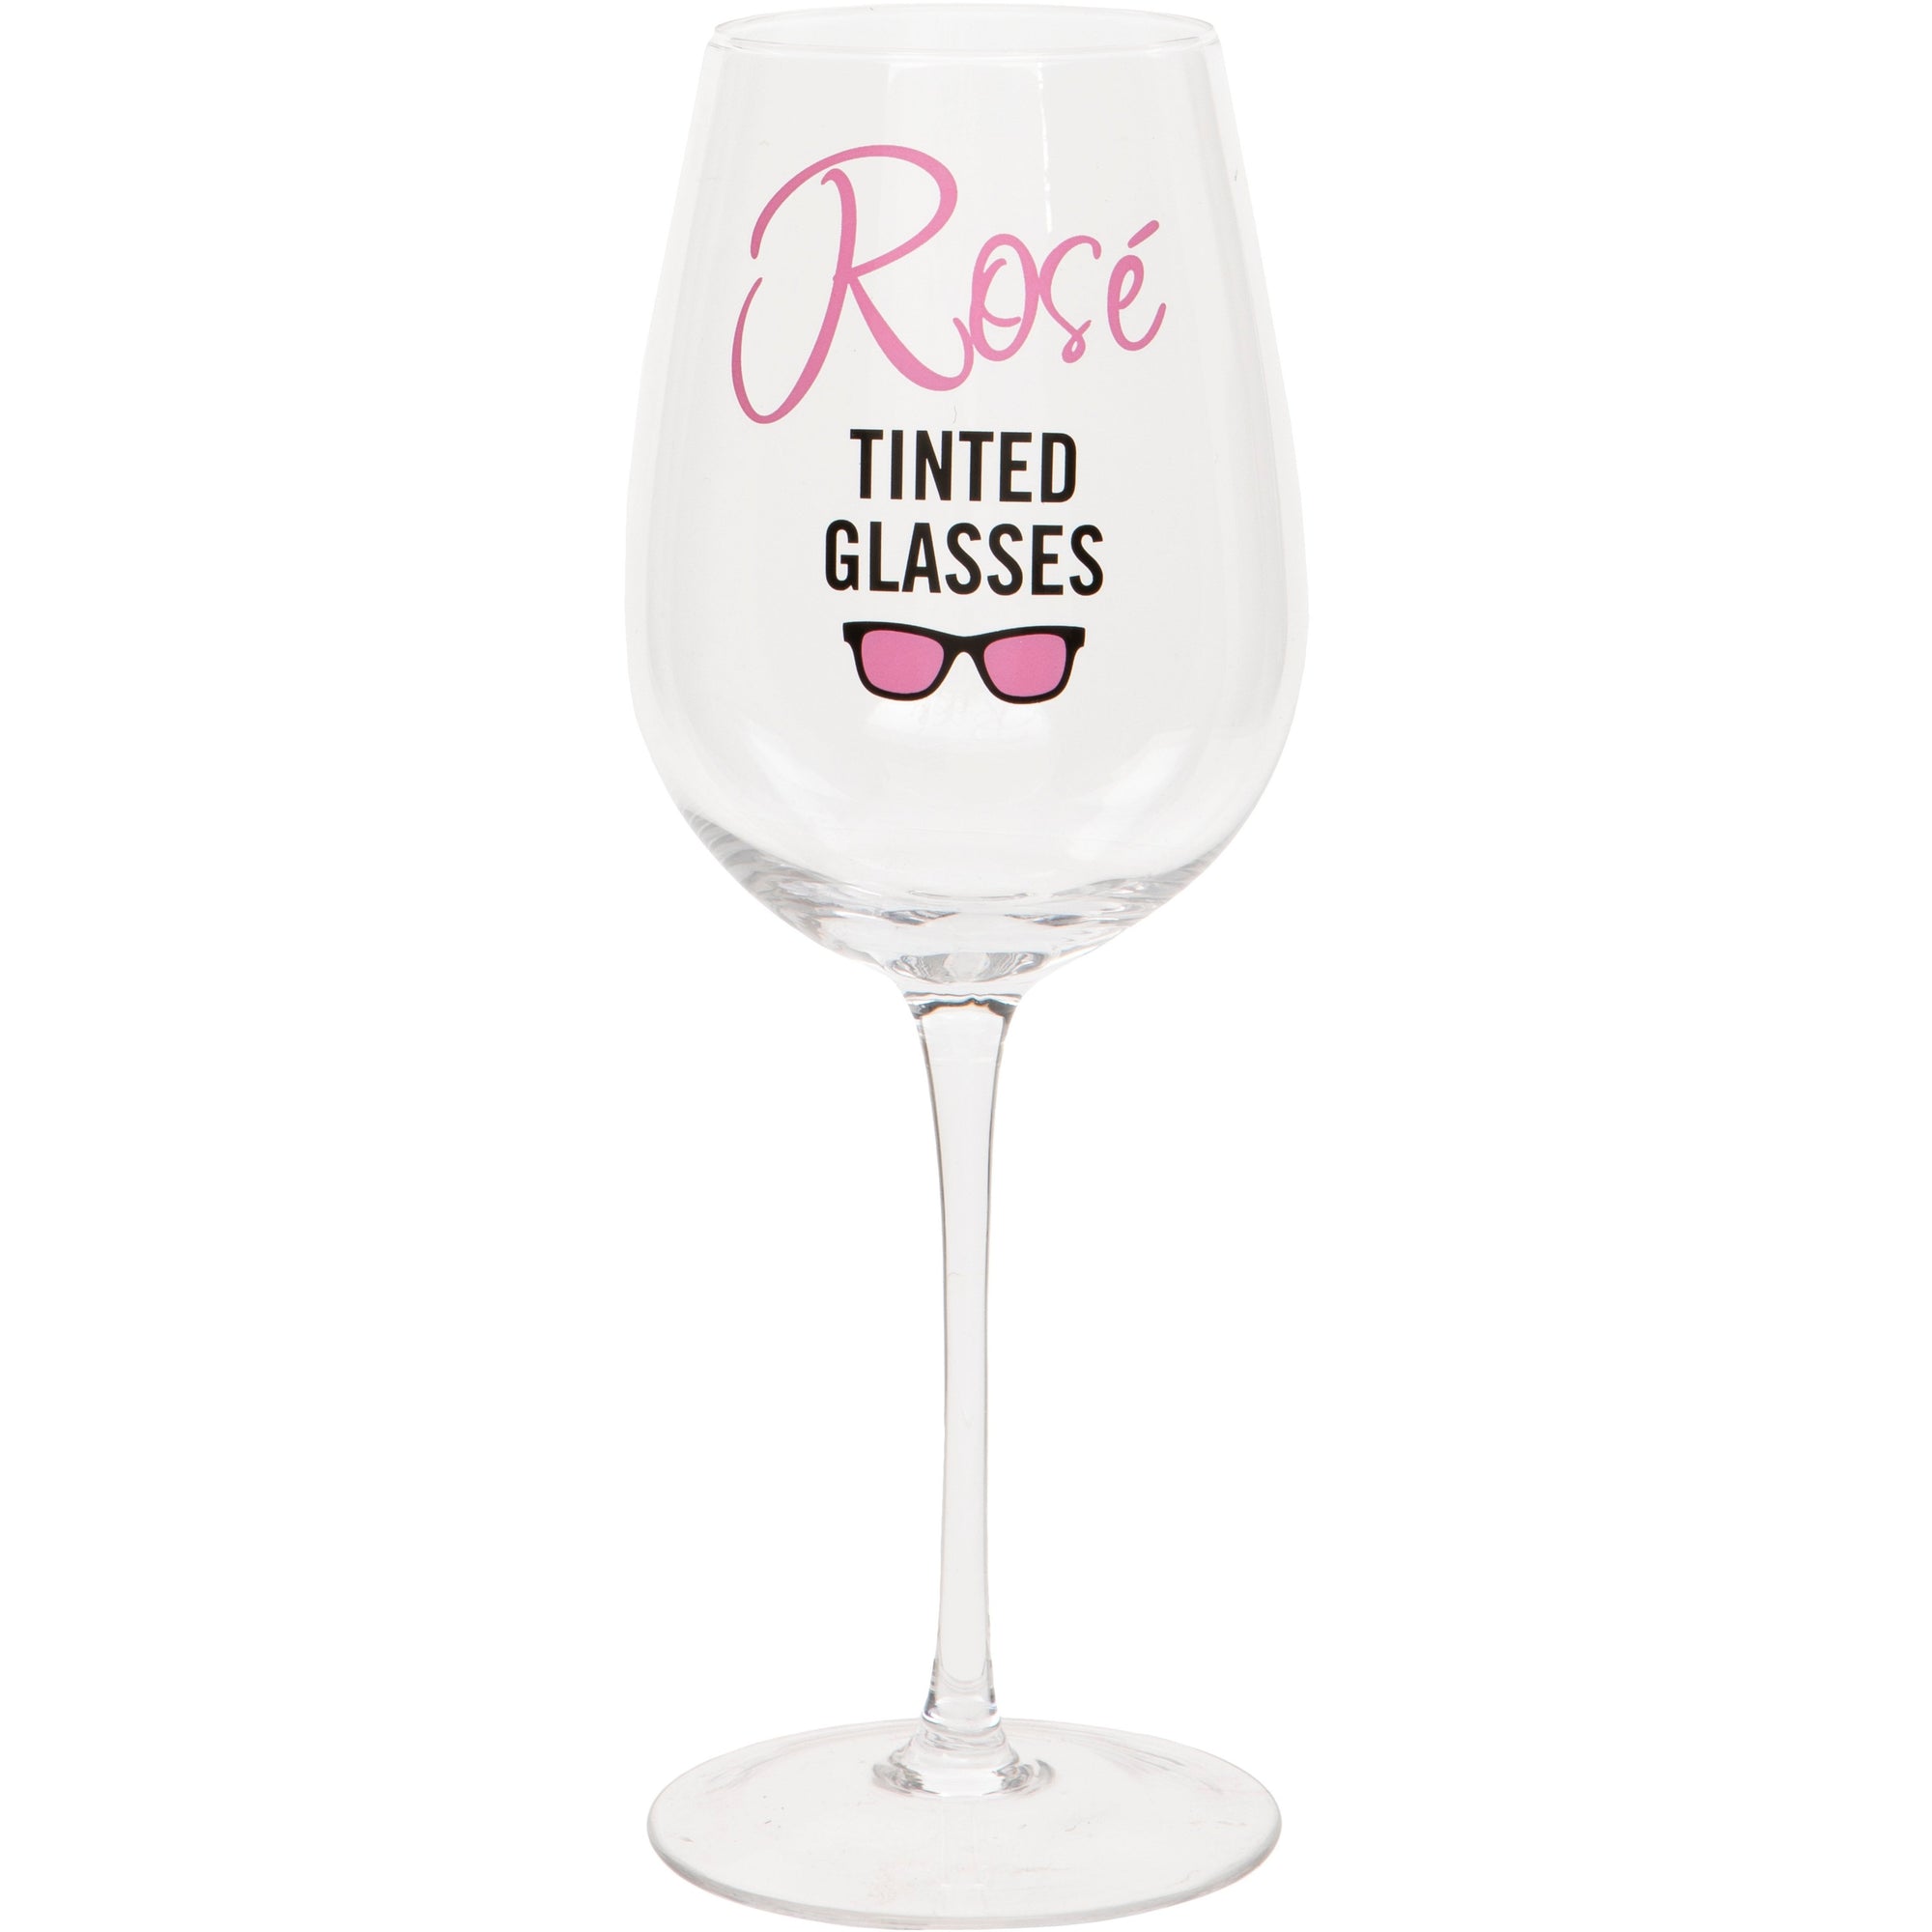 Rosé Tinted Glasses Wine Glass